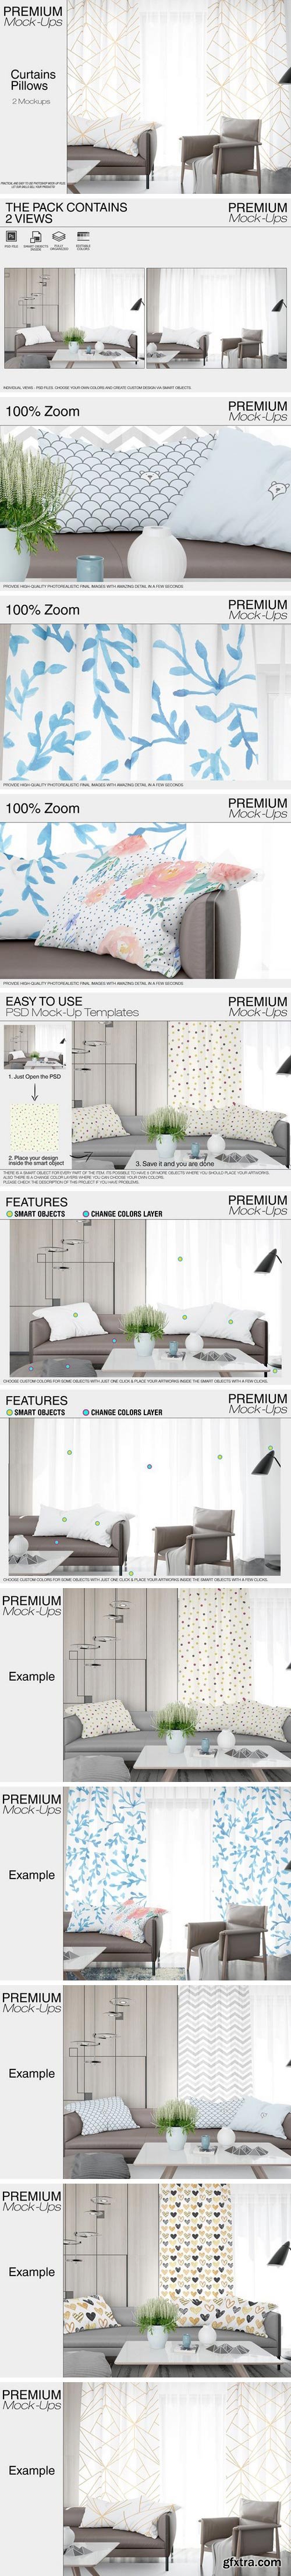 CM - Pillows and Curtains Mockup 2174078